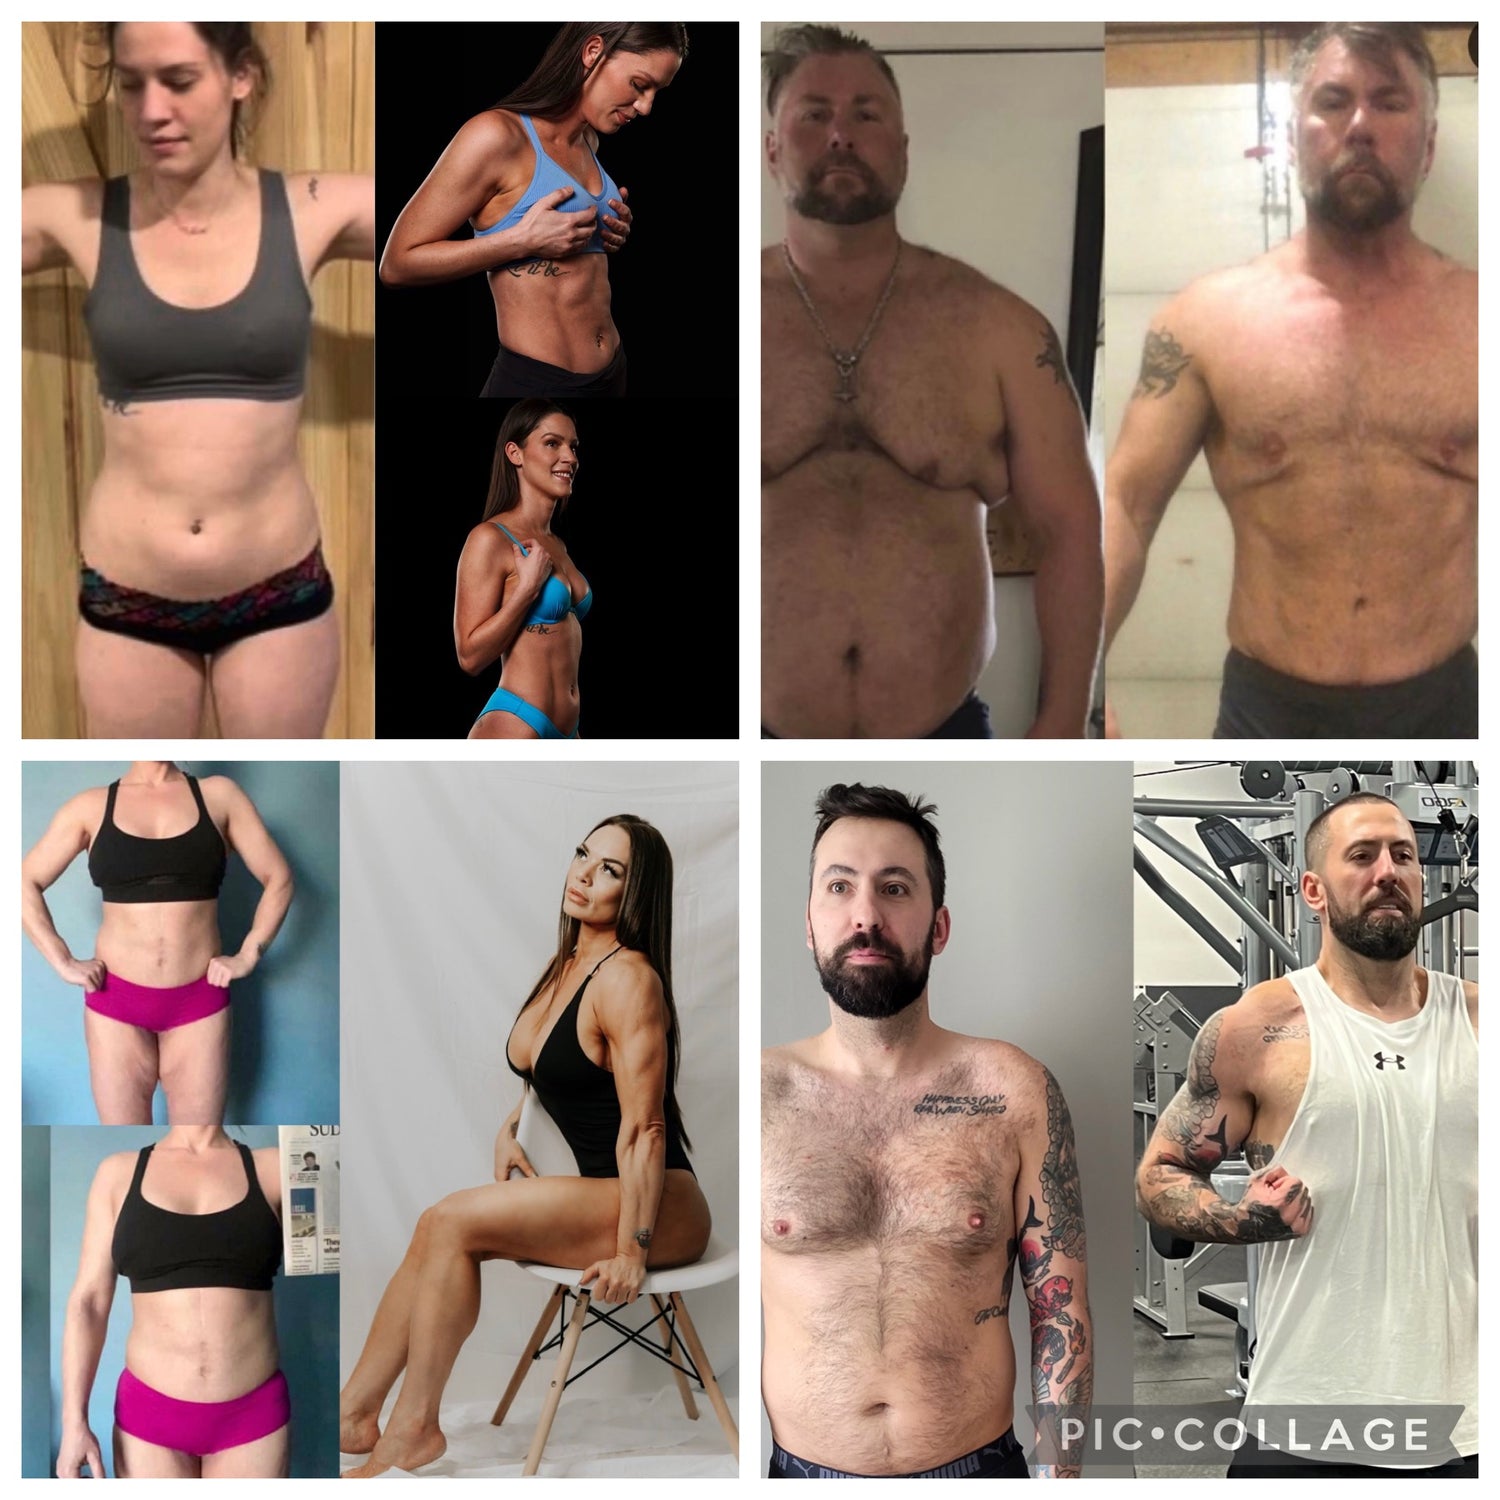 Compilation of two women and two men who have all gone through health and body improvements at the DeMelo Fitness gym